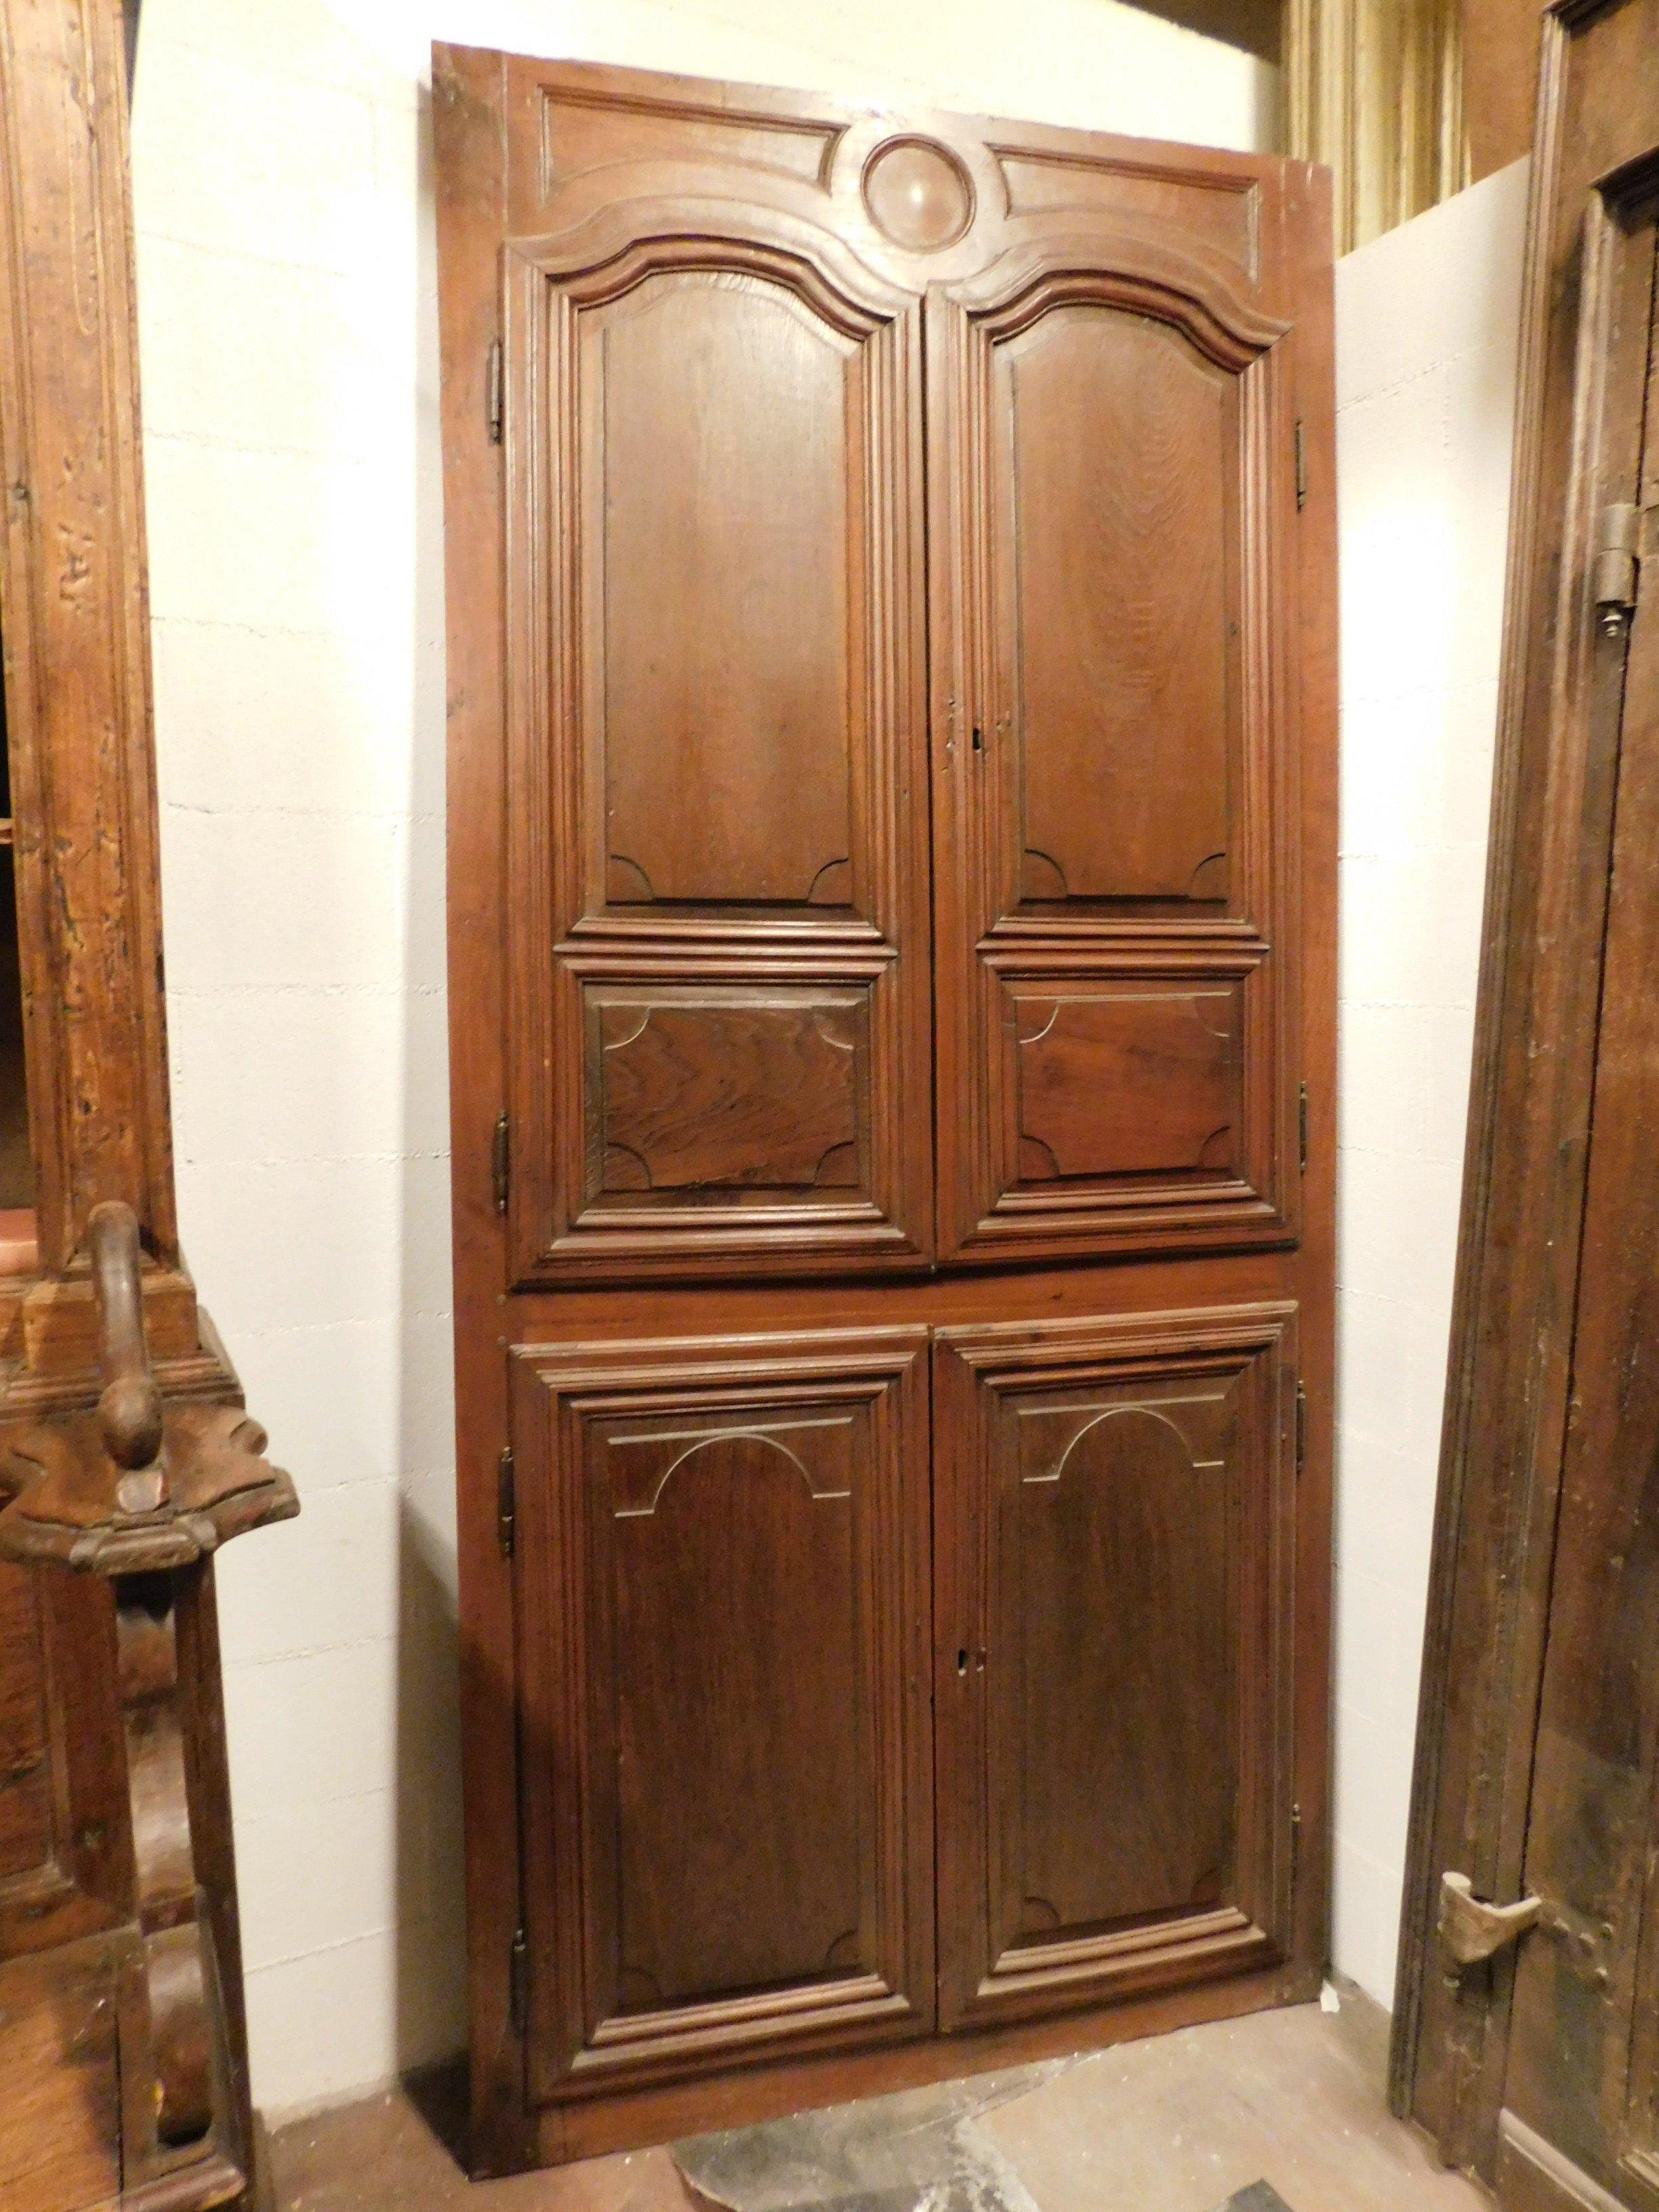 Ancient wall cabinet, door, built-in wardrobe, walnut placard with finely carved doors, divided into four doors, built in the 18th century, for home in Italy.
Ideal for making wardrobes, furniture in the wall, retractable, classy and in excellent